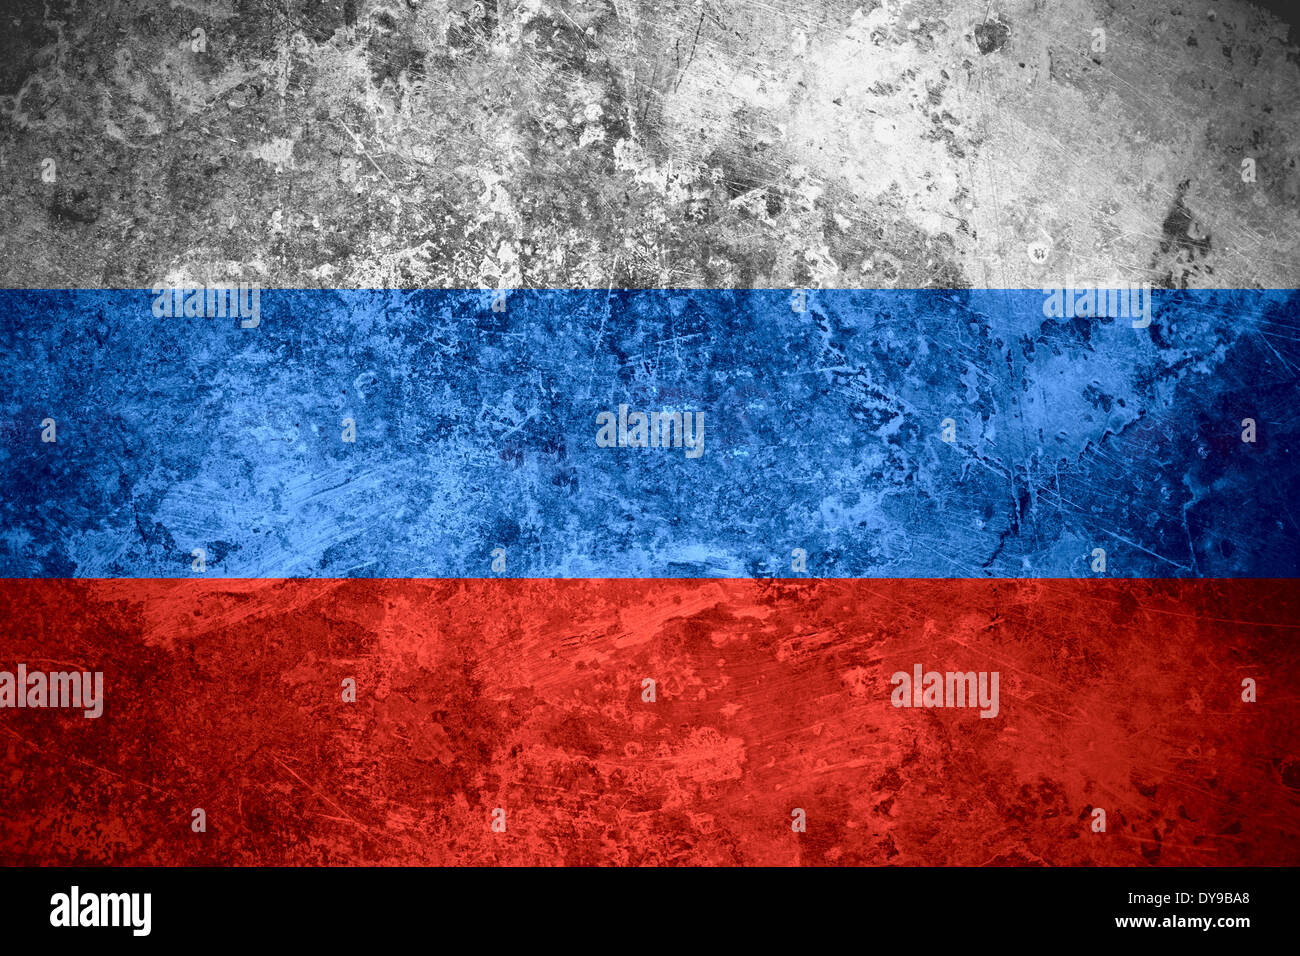 Russian flag Stock Photos, Royalty Free Russian flag Images